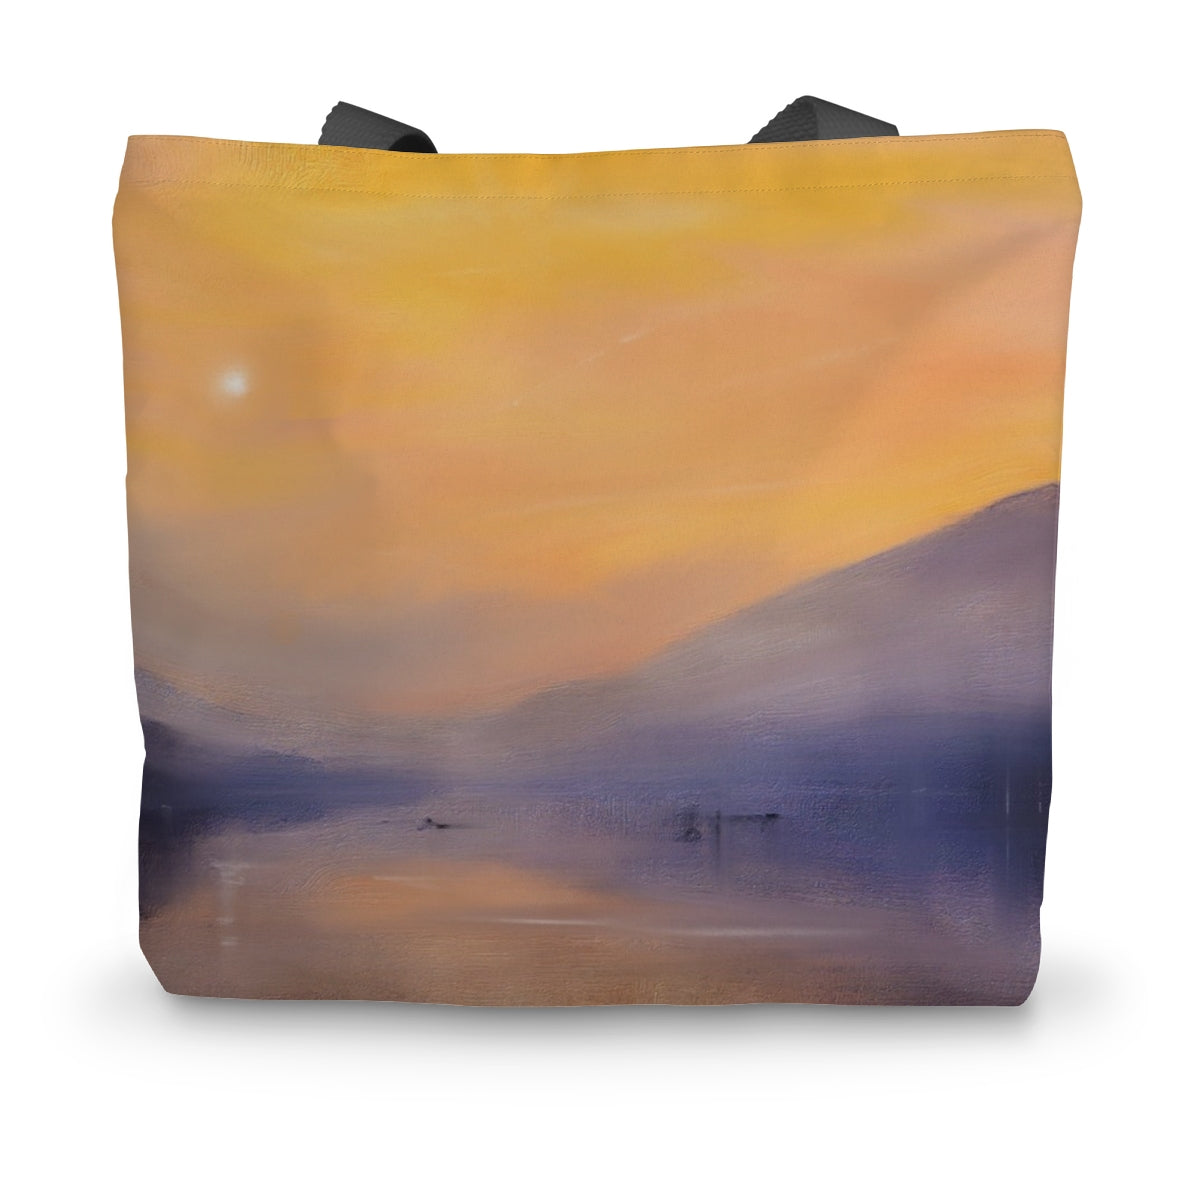 Loch Eck Dusk Art Gifts Canvas Tote Bag-Bags-Scottish Lochs & Mountains Art Gallery-14"x18.5"-Paintings, Prints, Homeware, Art Gifts From Scotland By Scottish Artist Kevin Hunter